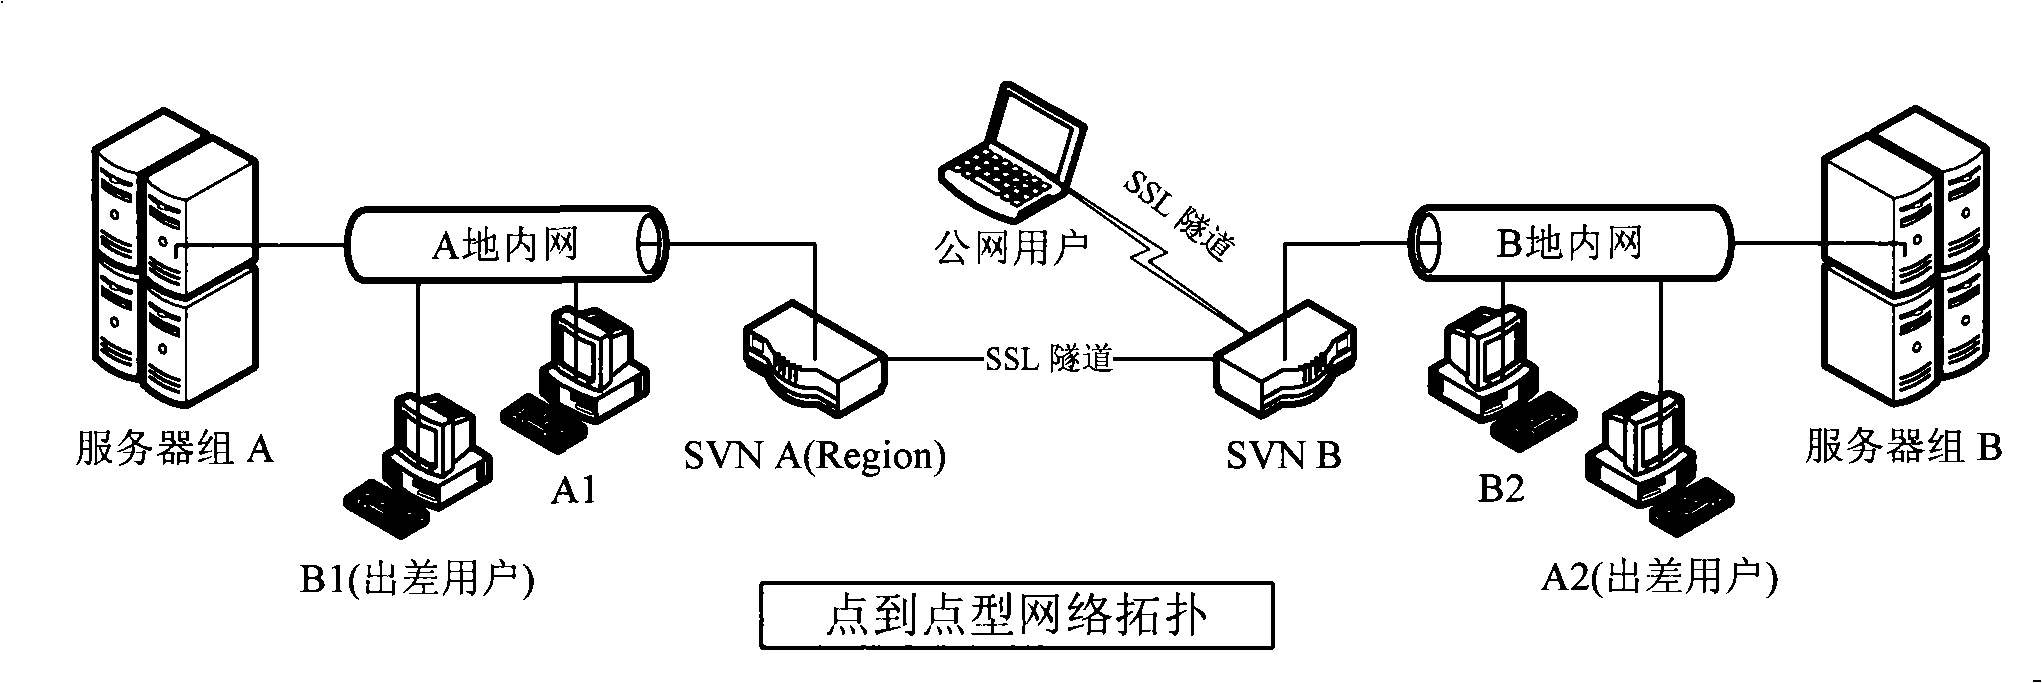 Method and apparatus for guarantee quality of service of secure socket layer of virtual private network